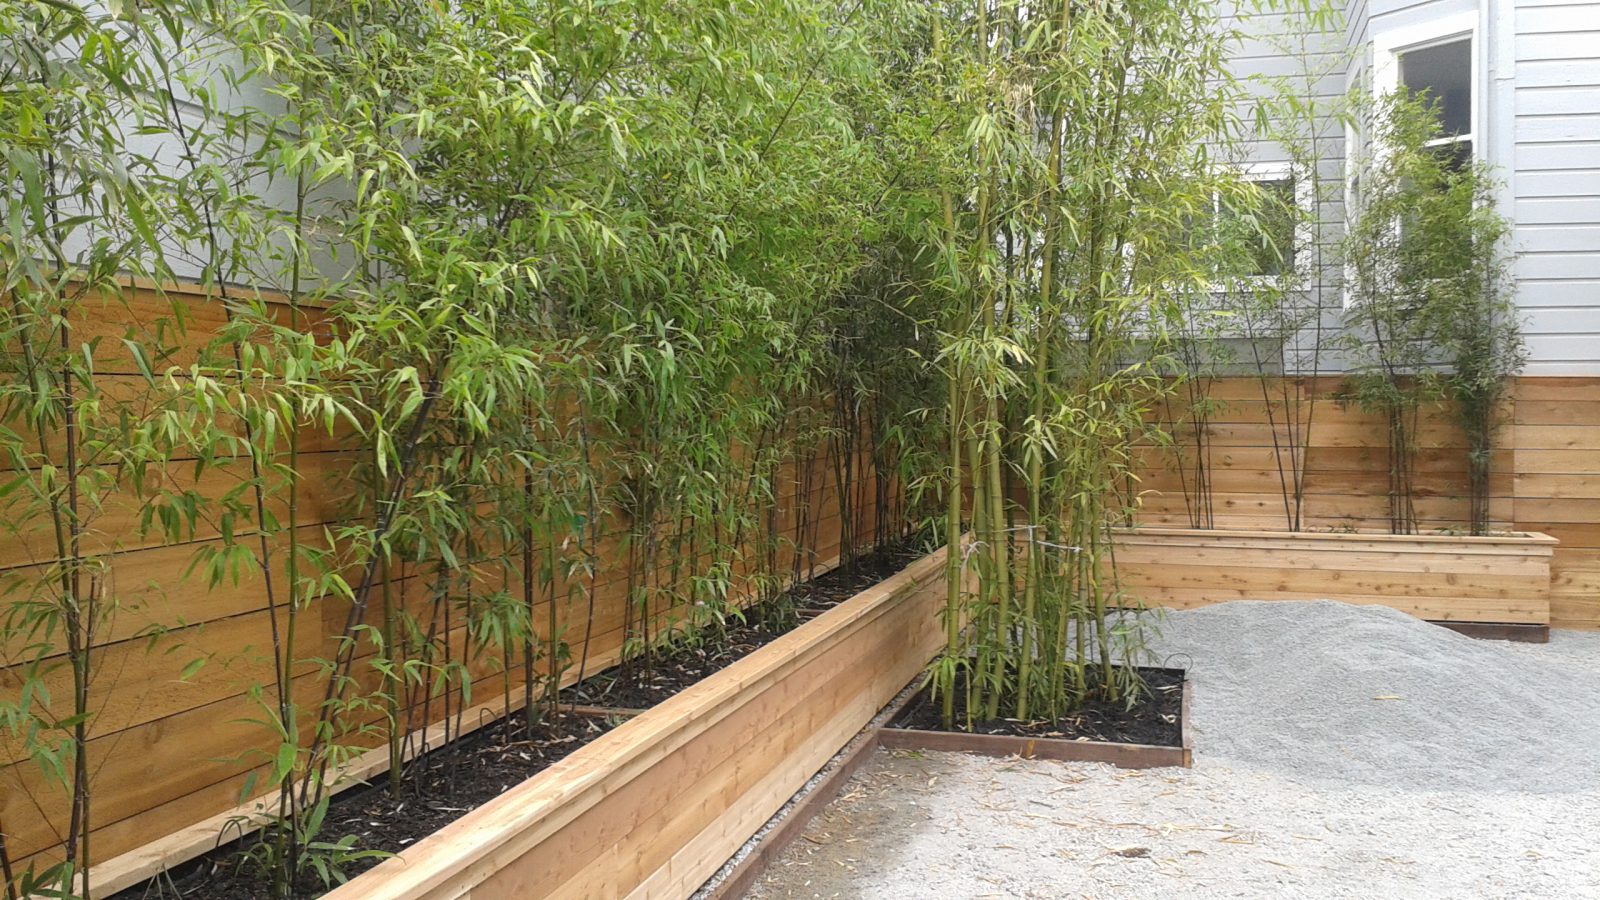  Bamboo Trees For Privacy with Simple Decor